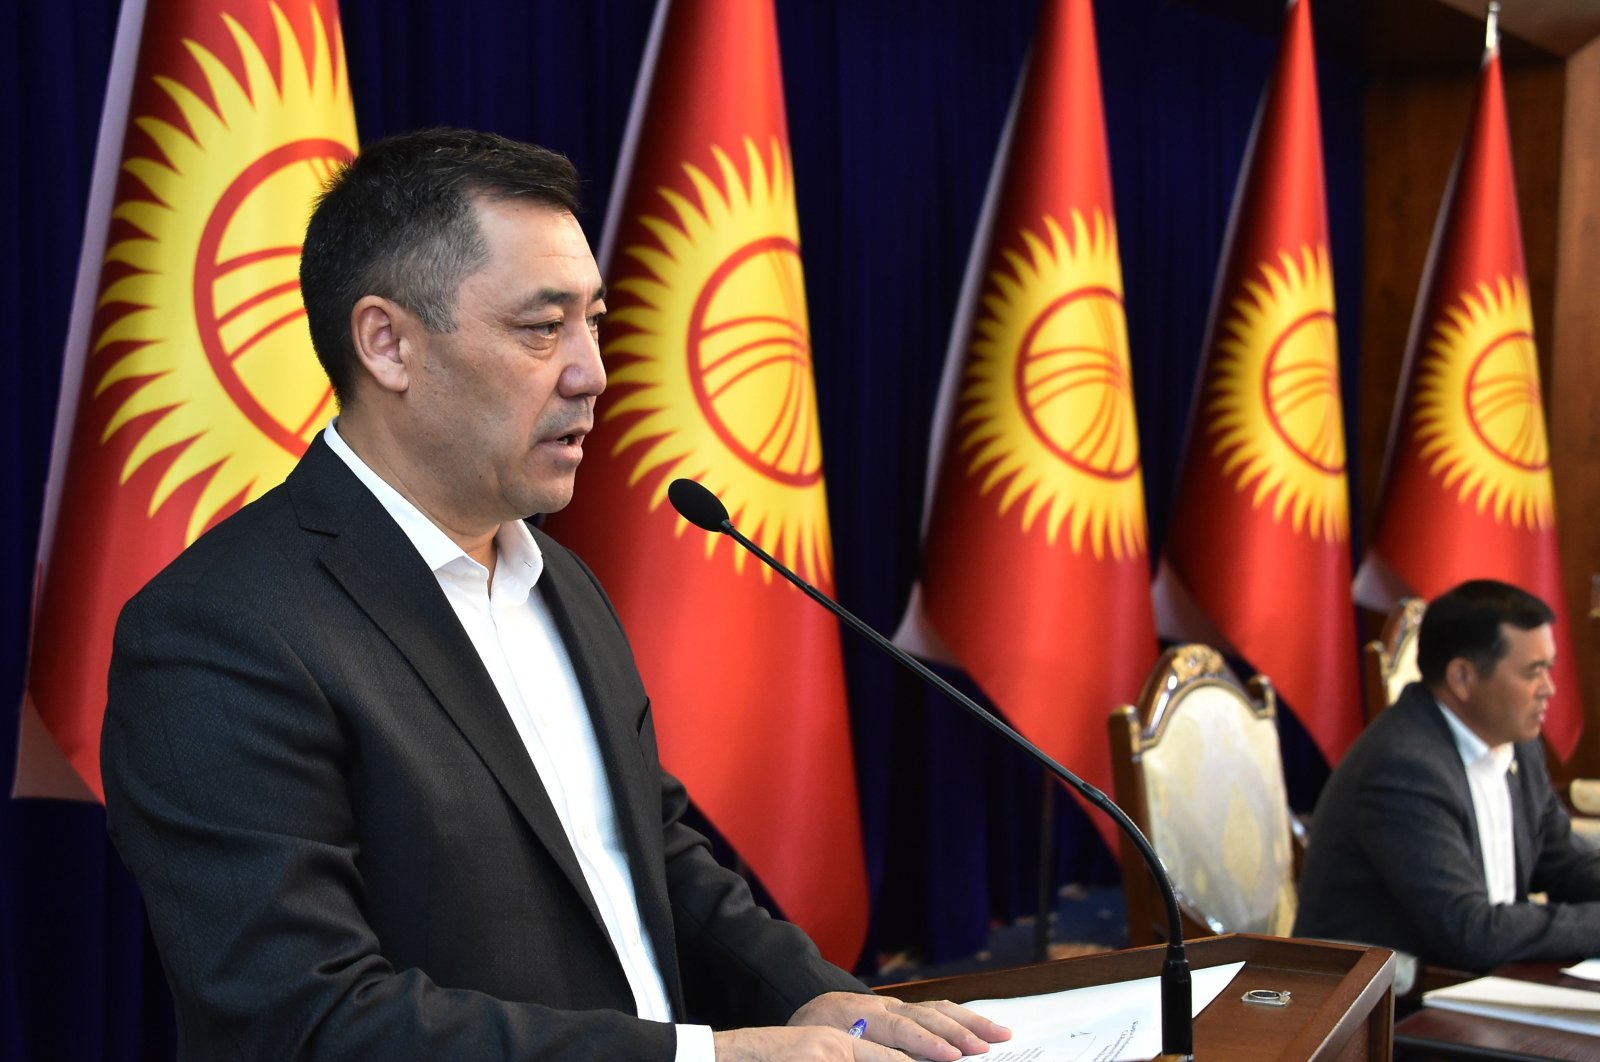 Kyrgyz Prime Minister Sadyr Zhaparov speaks at an extraordinary session of the Parliament at the Ala-Archa state residence, Bishkek, Oct. 10, 2020. (AFP Photo)